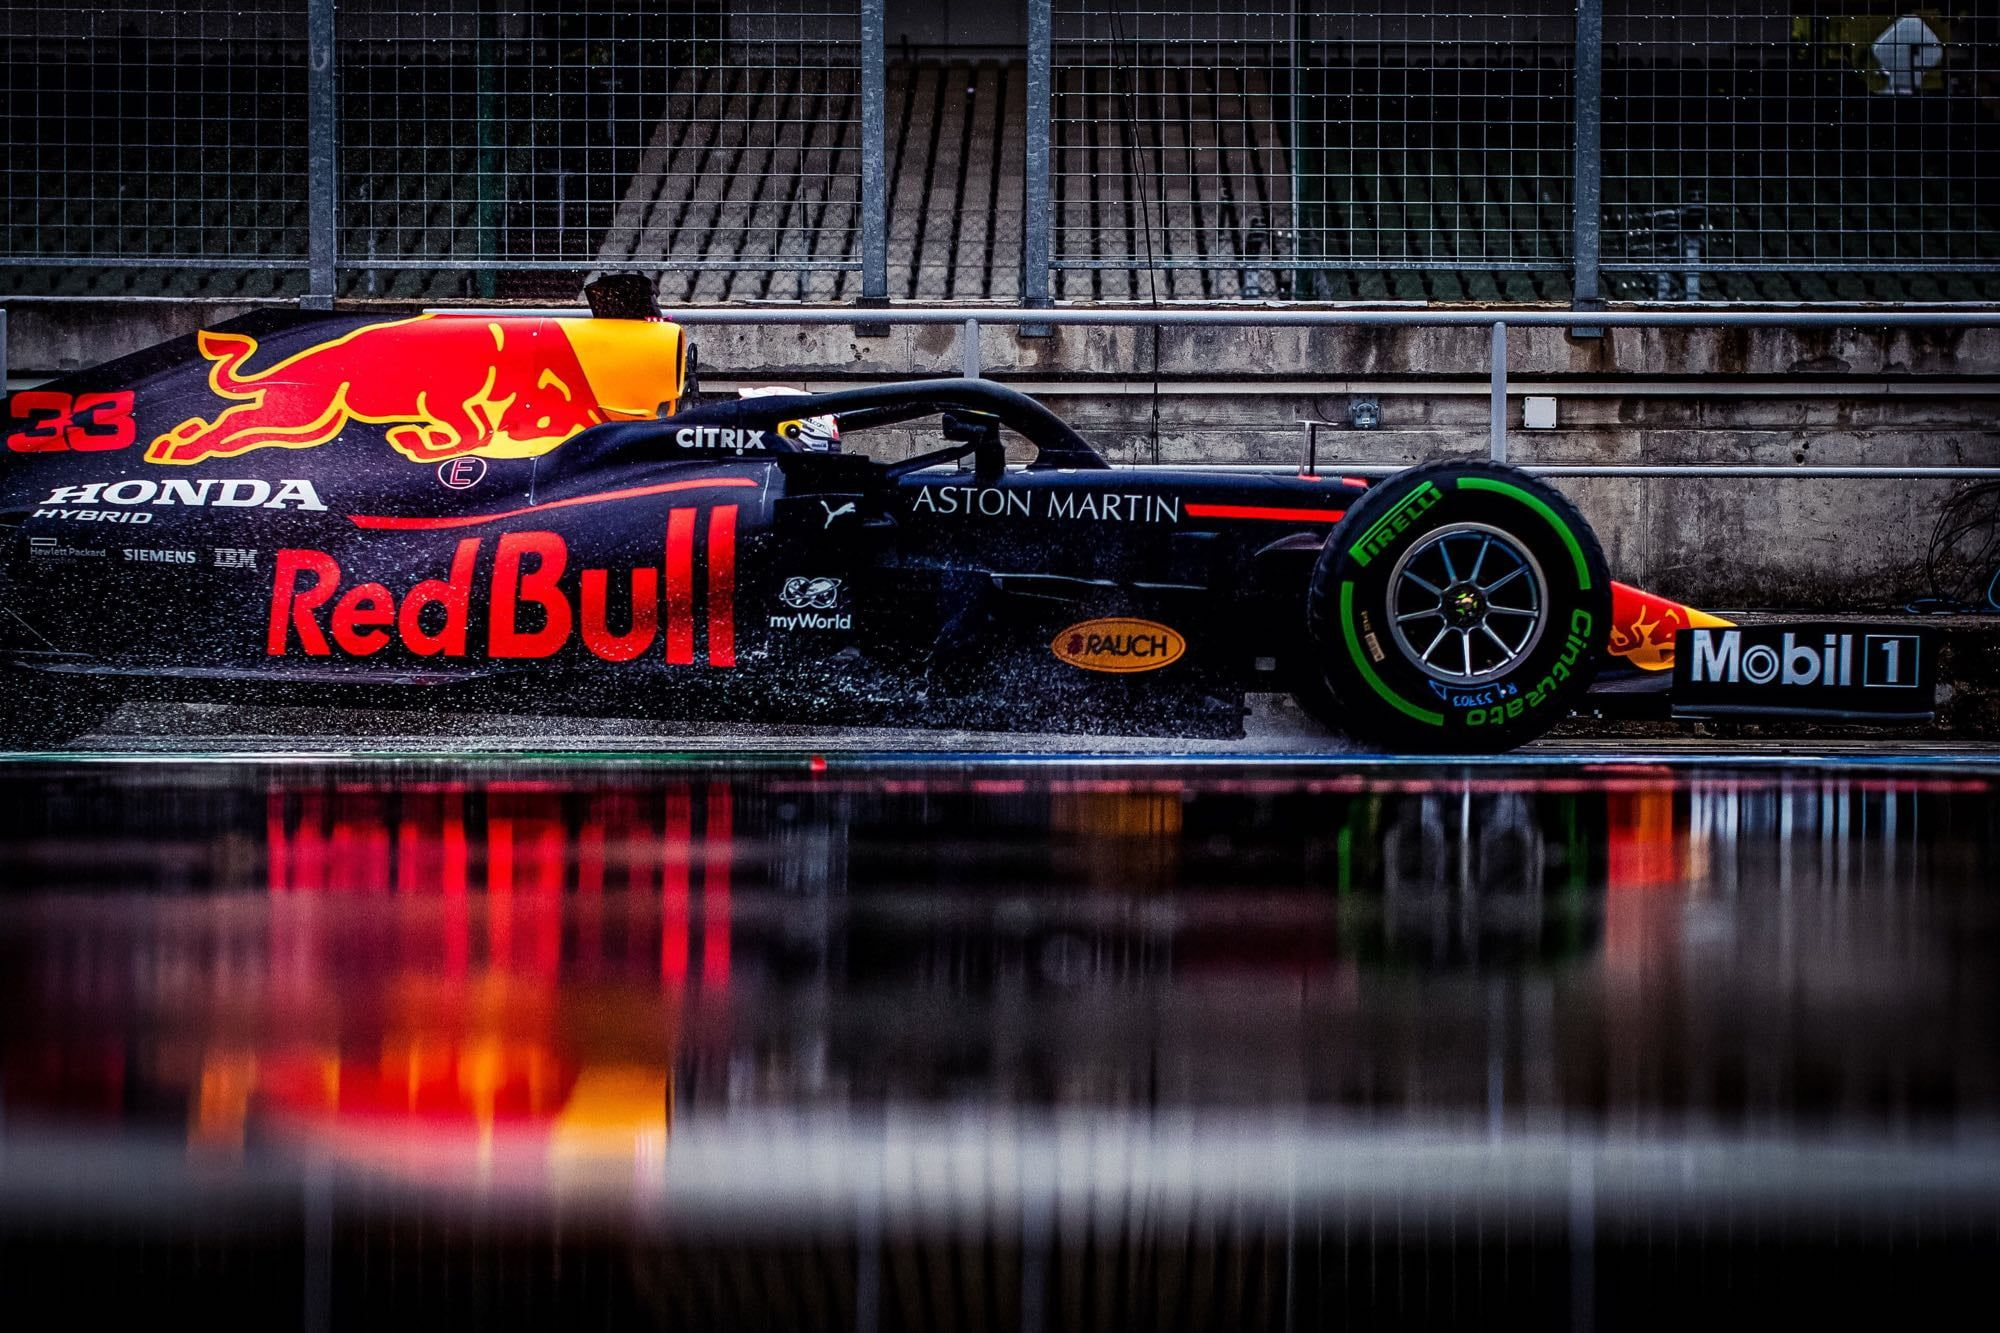 2000x1333 Aston Martin Red Bull F1 Wallpapers Top Free Aston Martin Red Bull F1 Backgrounds